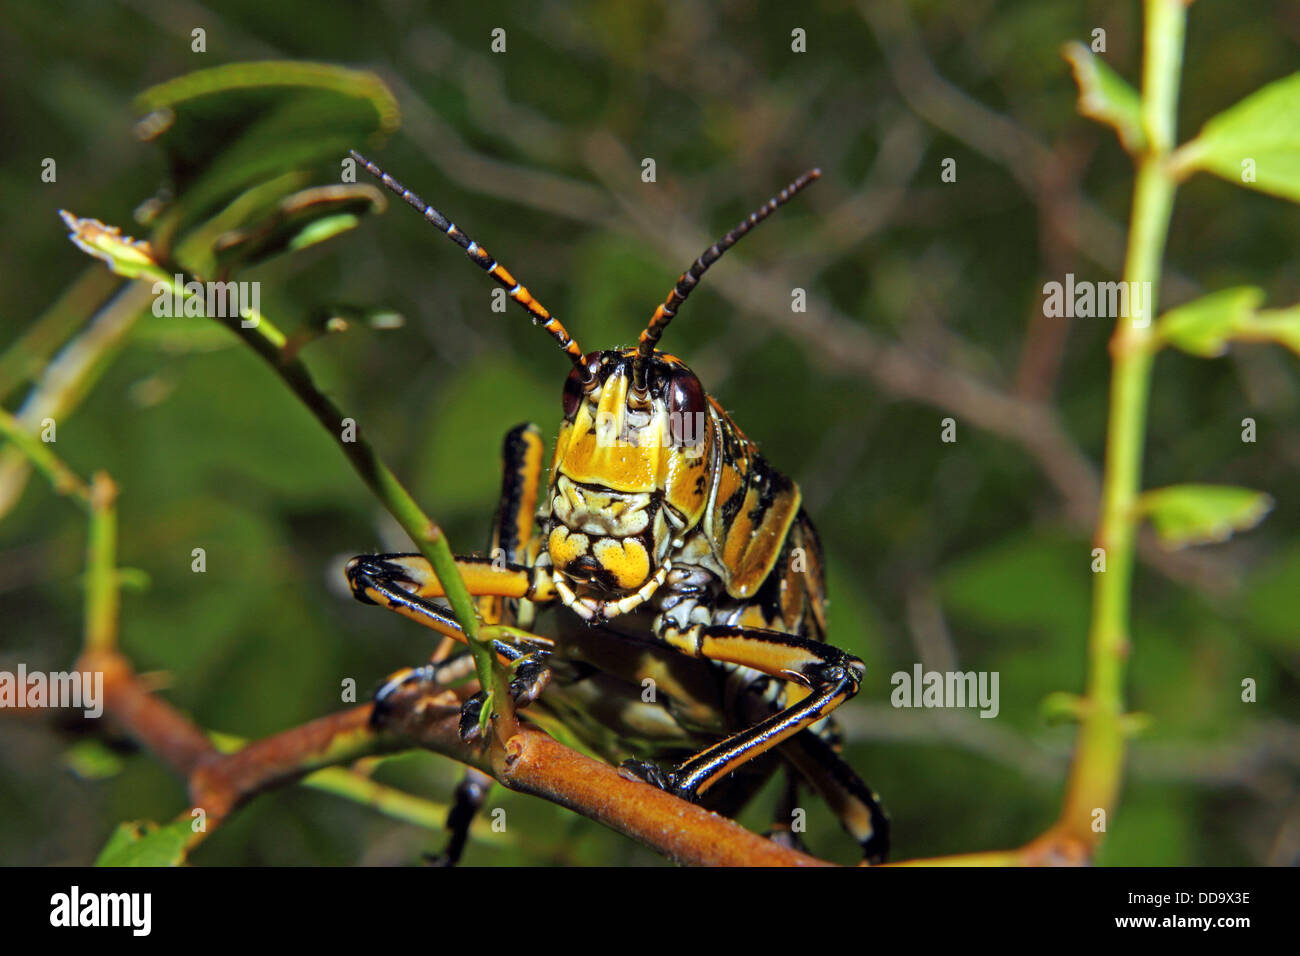 Close up view of an Eastern Lubber grasshopper Stock Photo